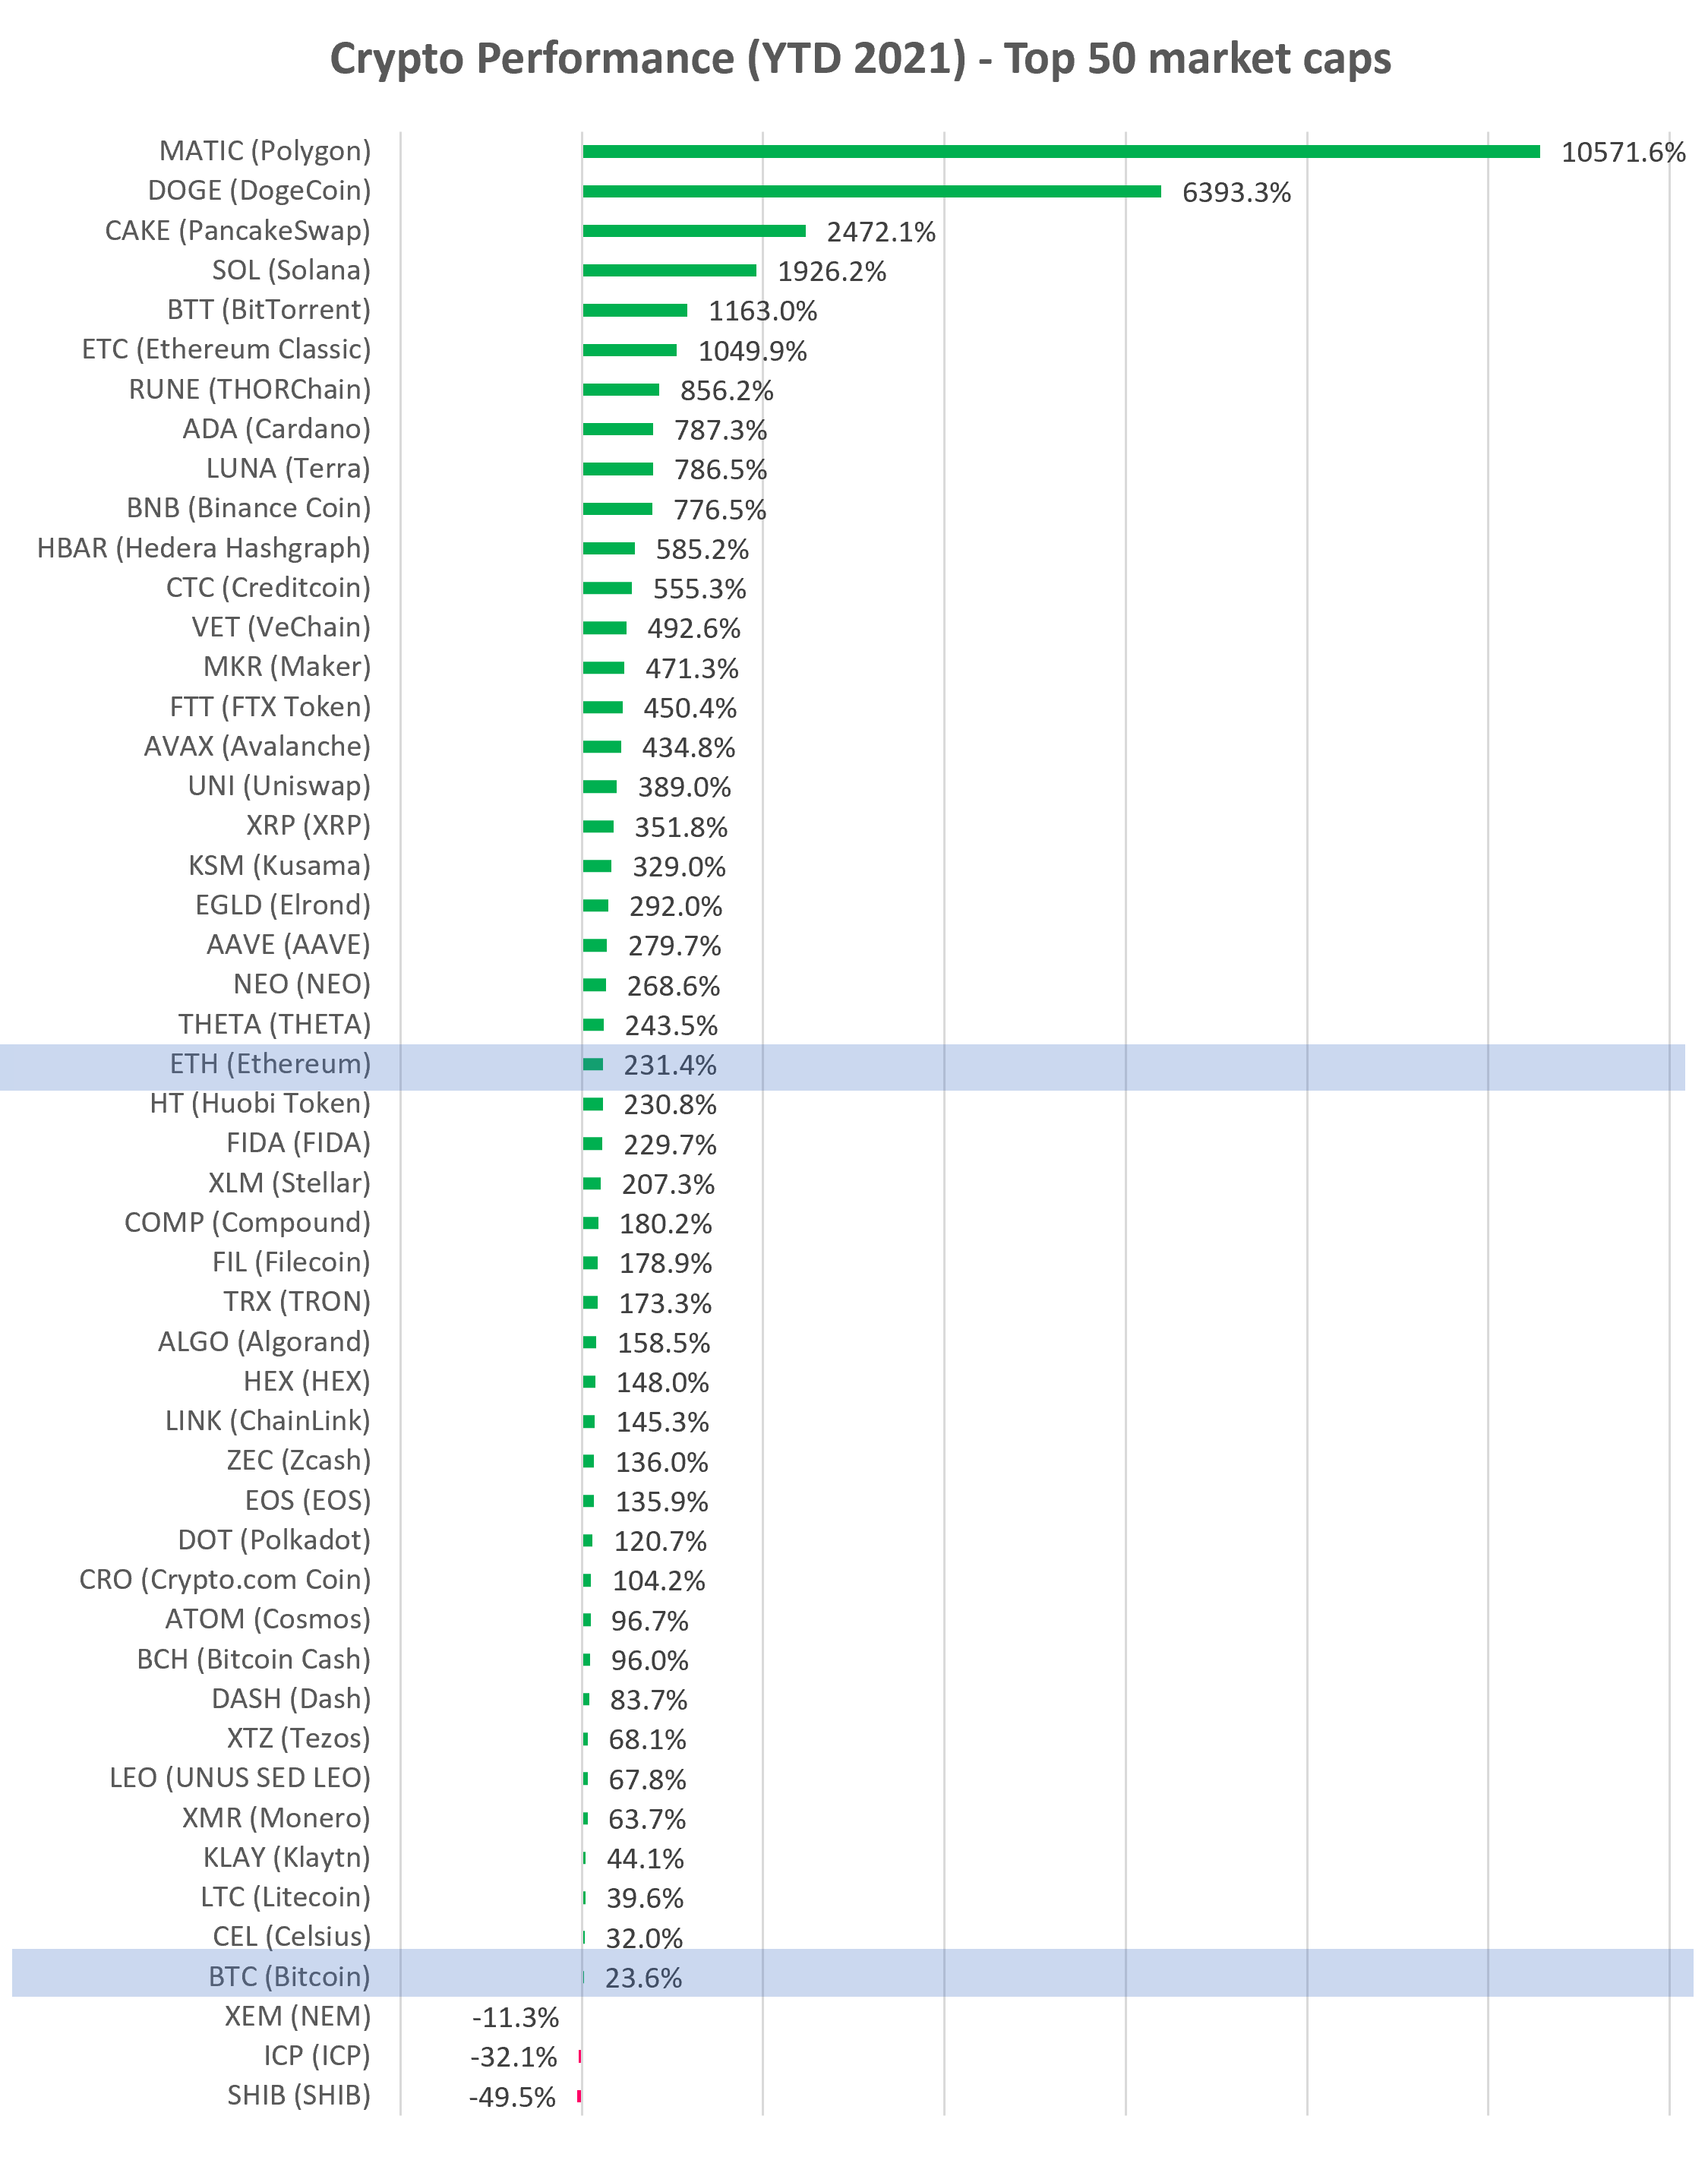 Cryptocurrency YTD performance top 50 market cap